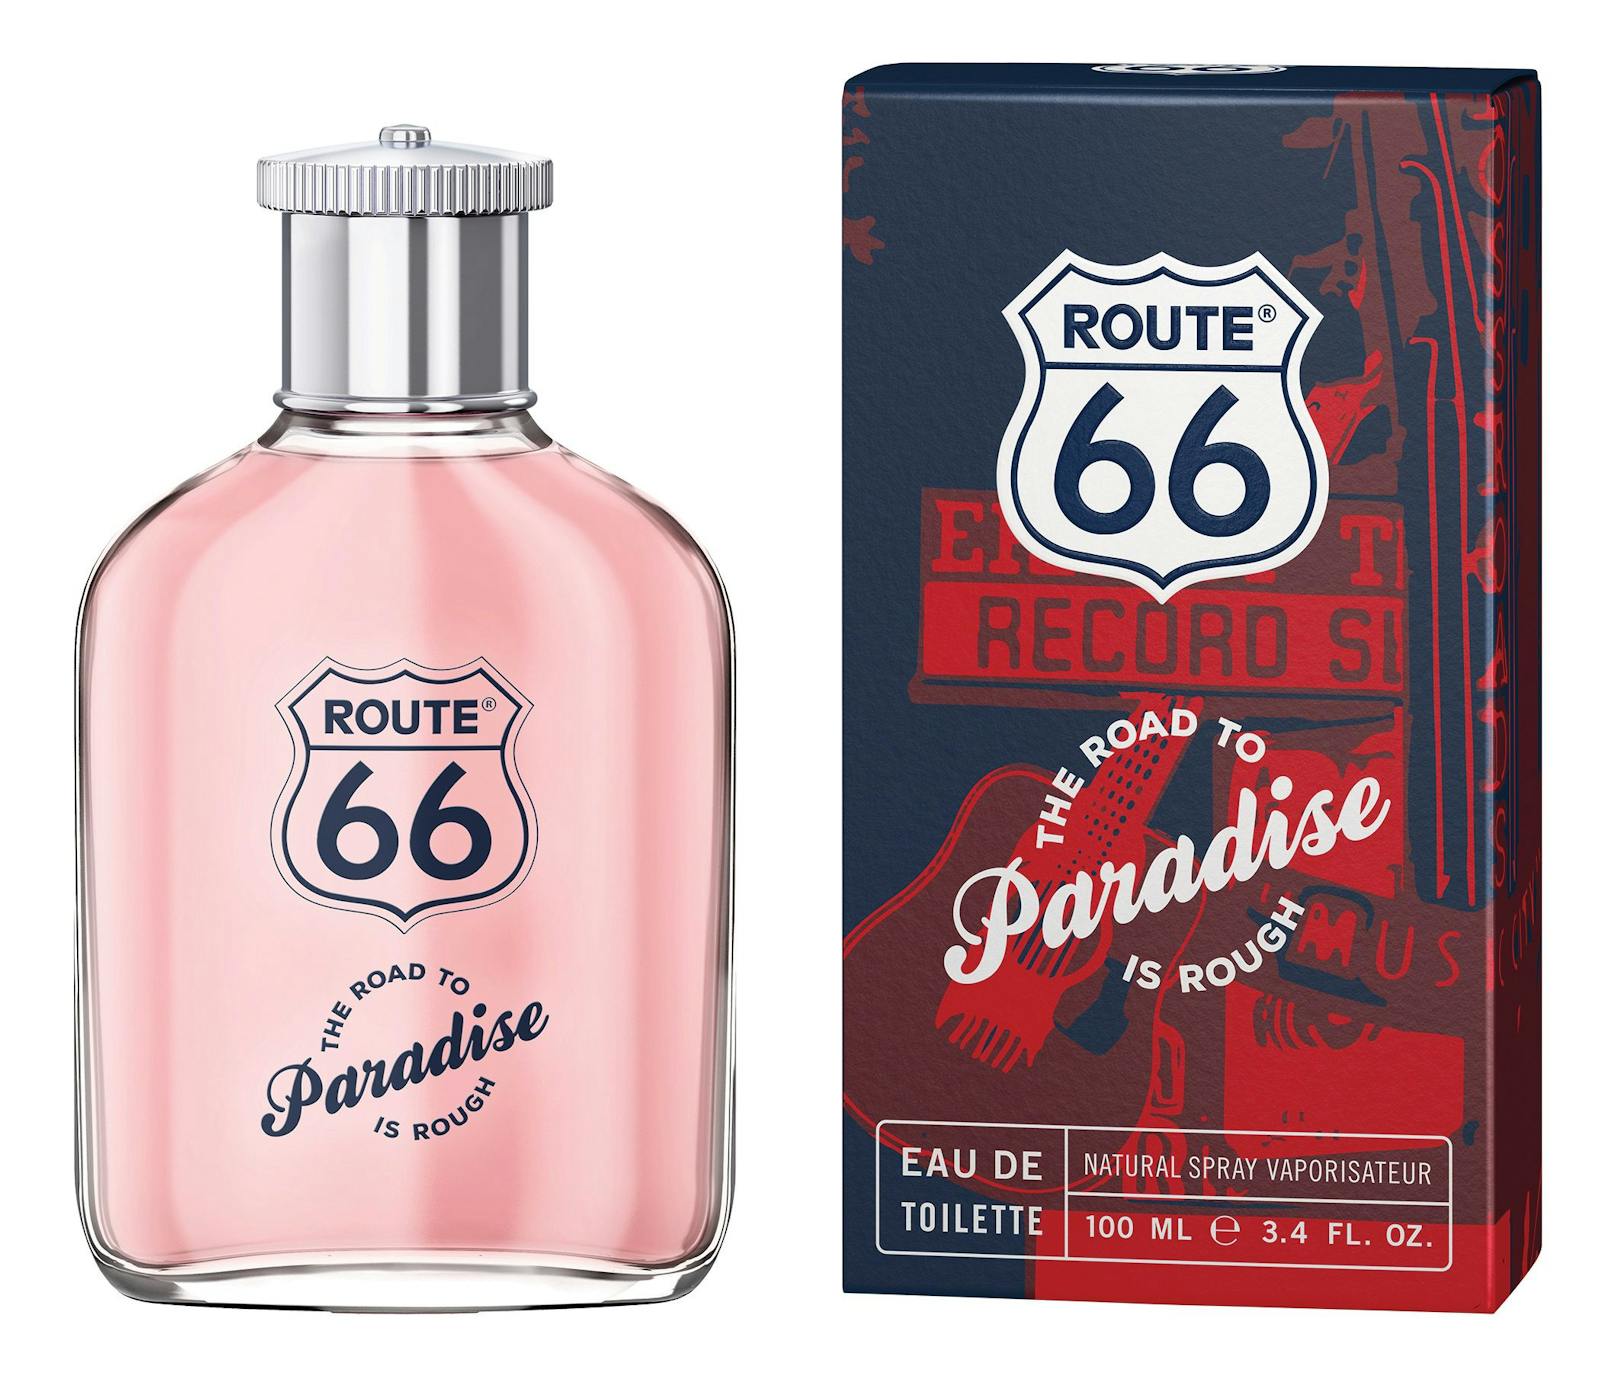 Route 66 "Road To Paradise"